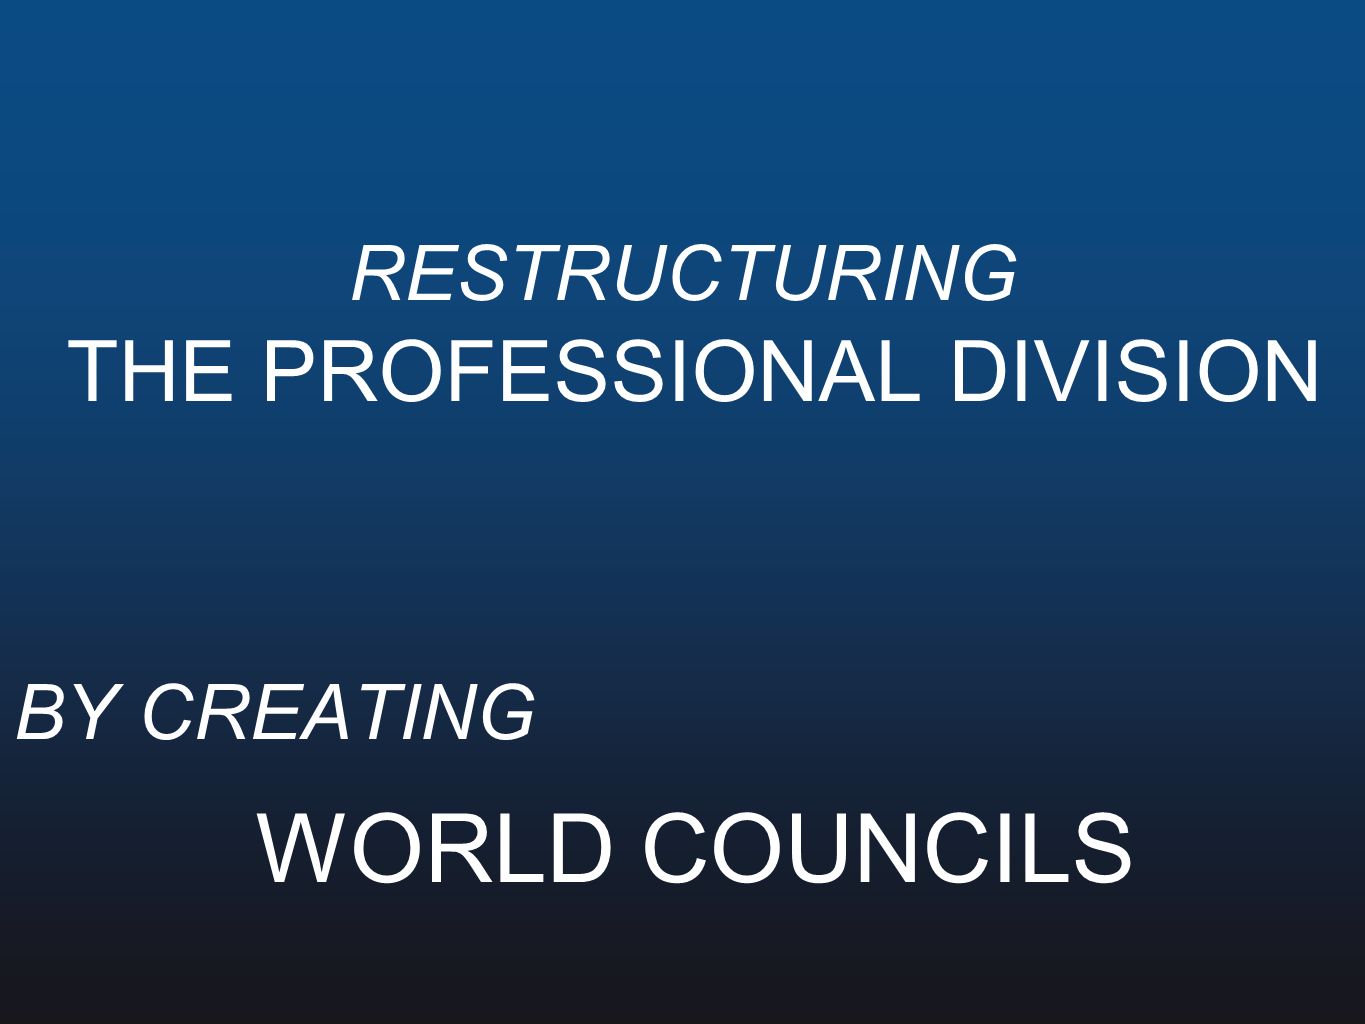 RESTRUCTURING THE PROFESSIONAL DIVISION BY CREATING WORLD COUNCILS